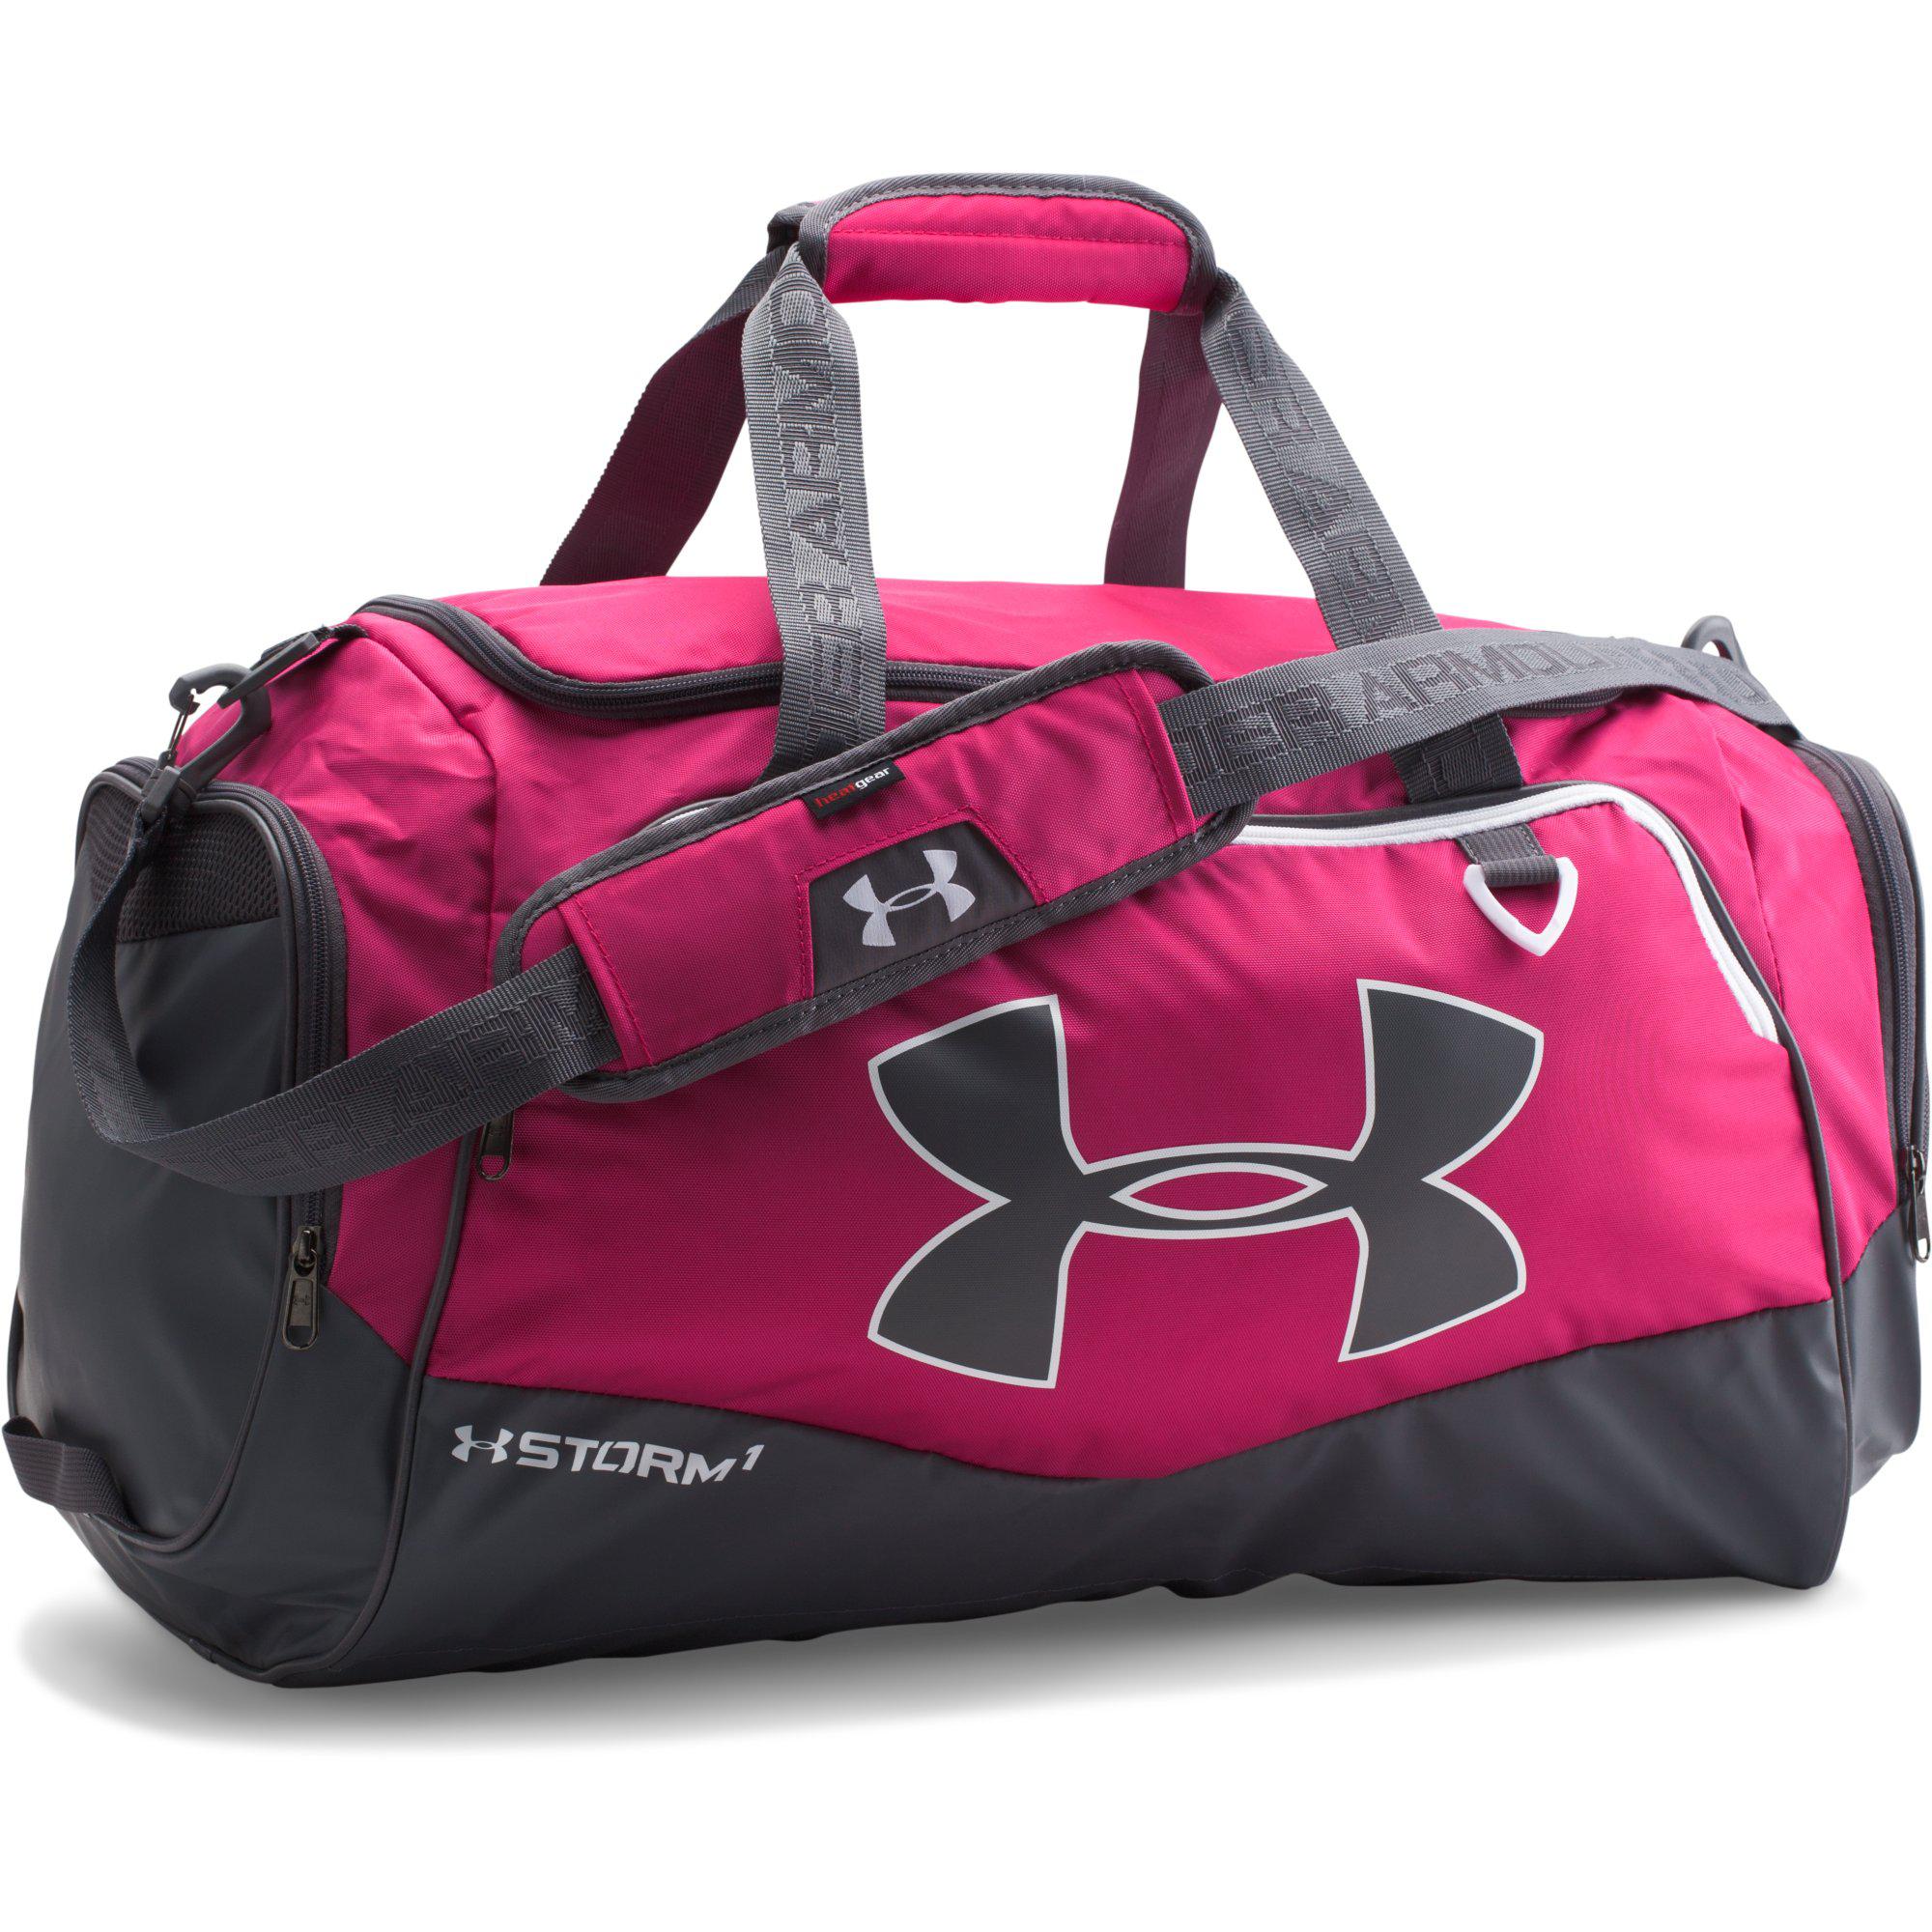 Under Armour Storm Undeniable II MD Duffel Bag - Pink - www.waterandnature.org